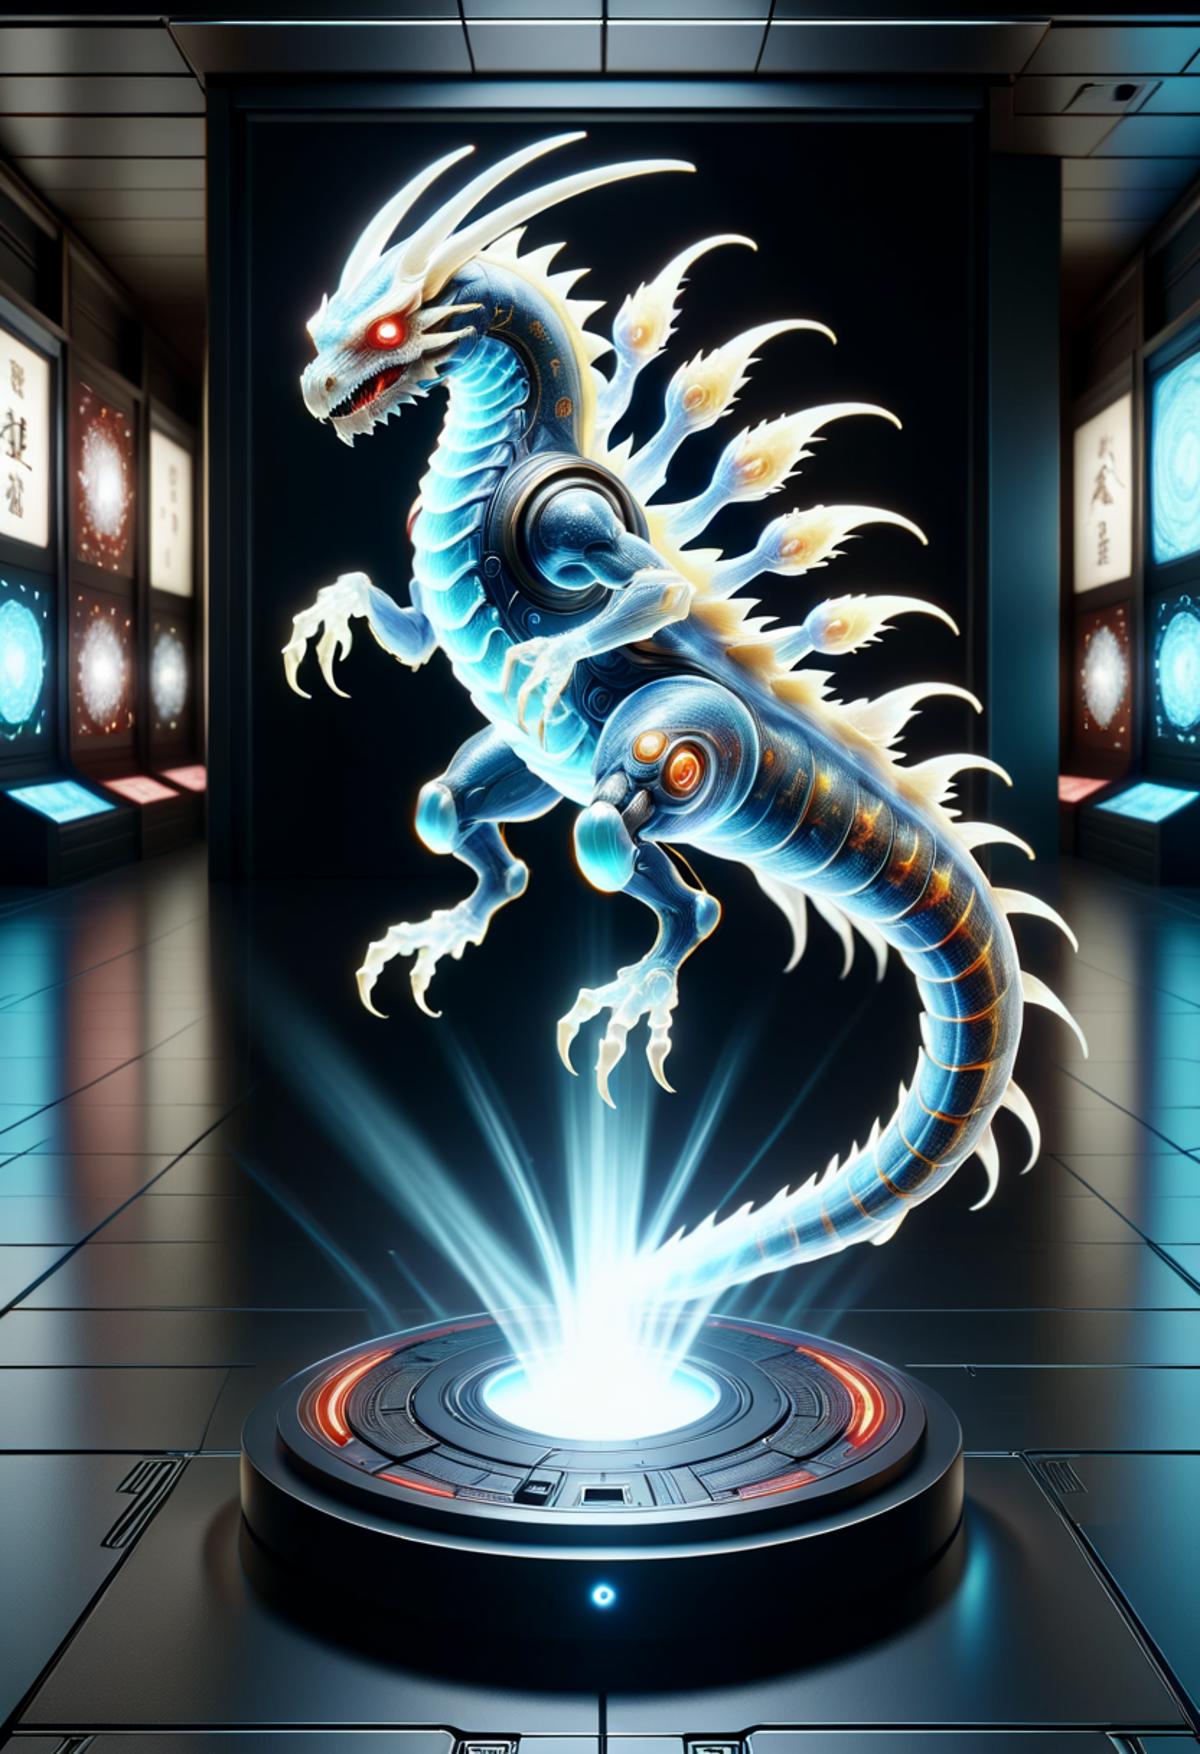 A computer-generated image of a robotic dragon with glowing eyes, standing on a pedestal in a dark room.